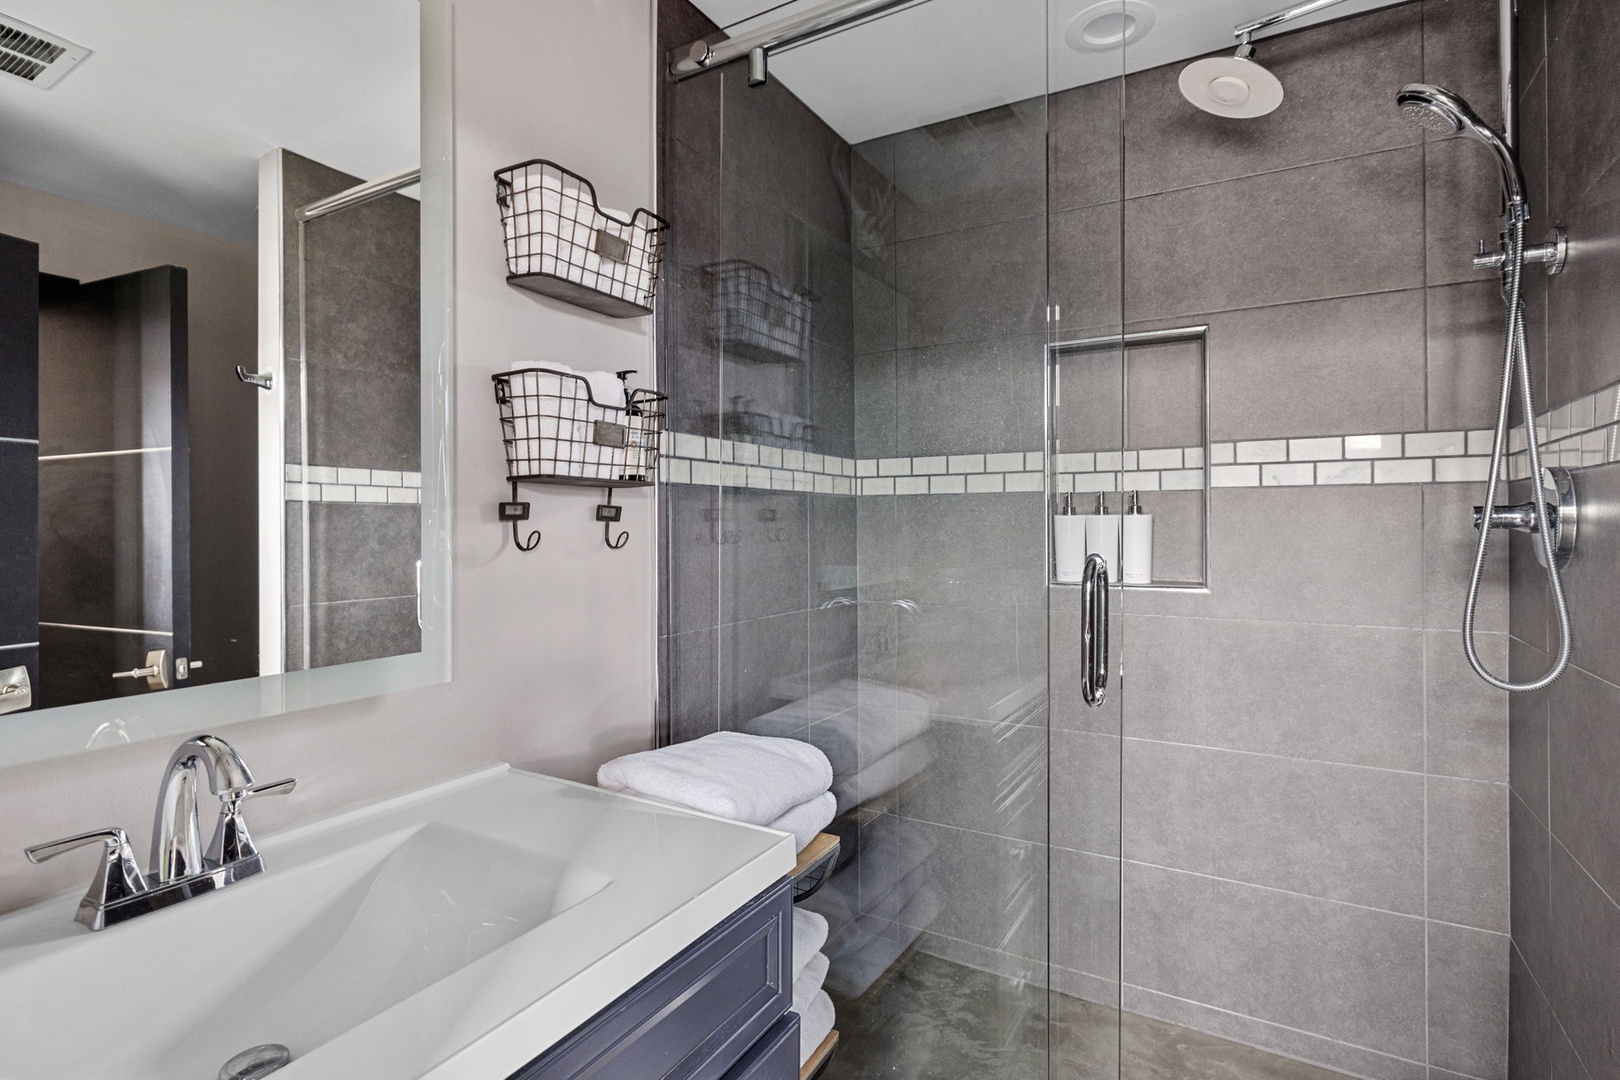 Another gorgeous bathroom with a walk-in tiled shower - plus dual showerheads.